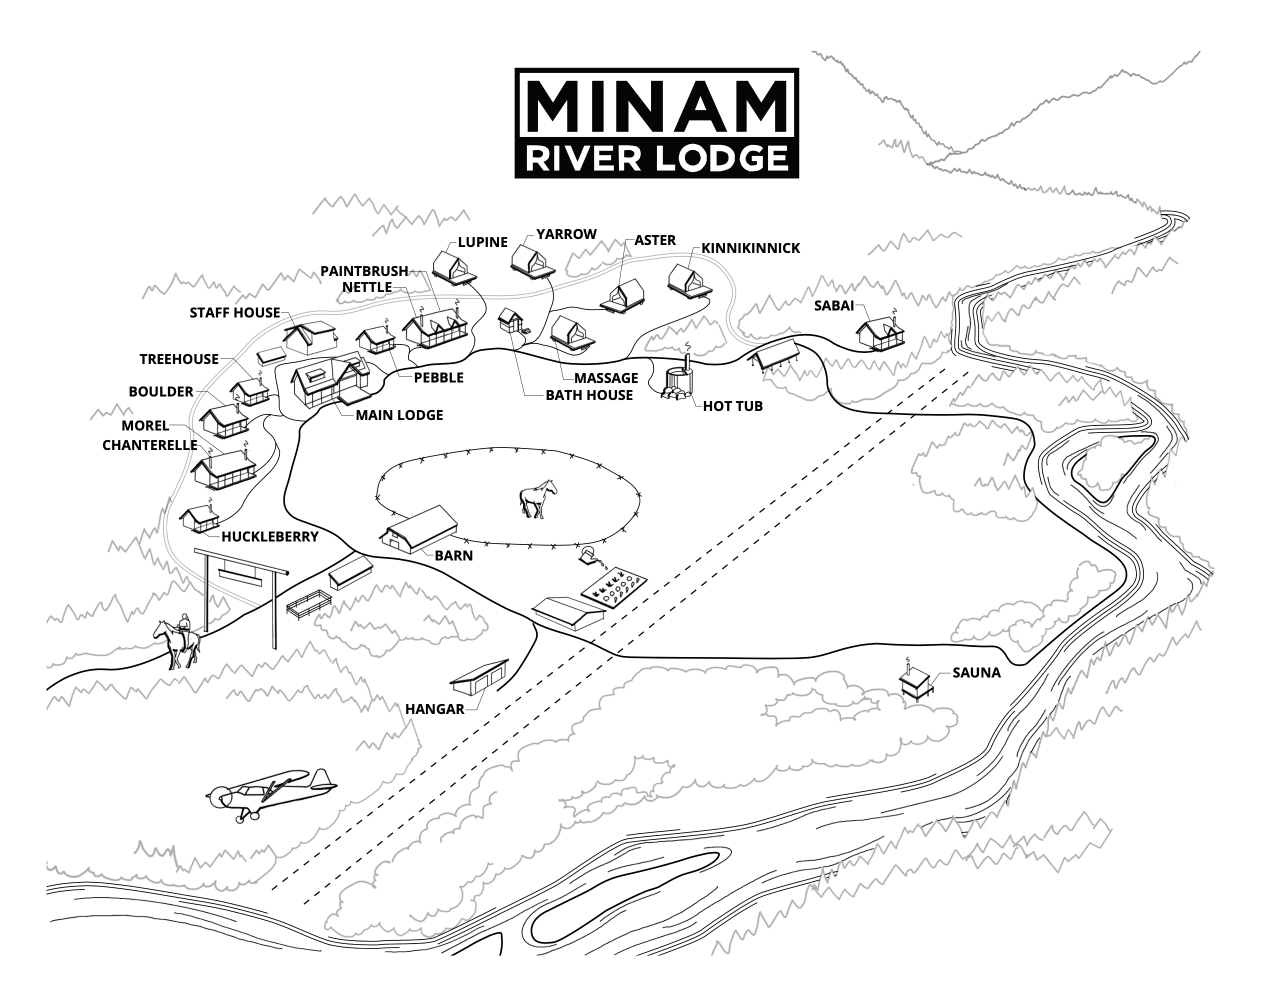 Map of the Minam River Lodge property